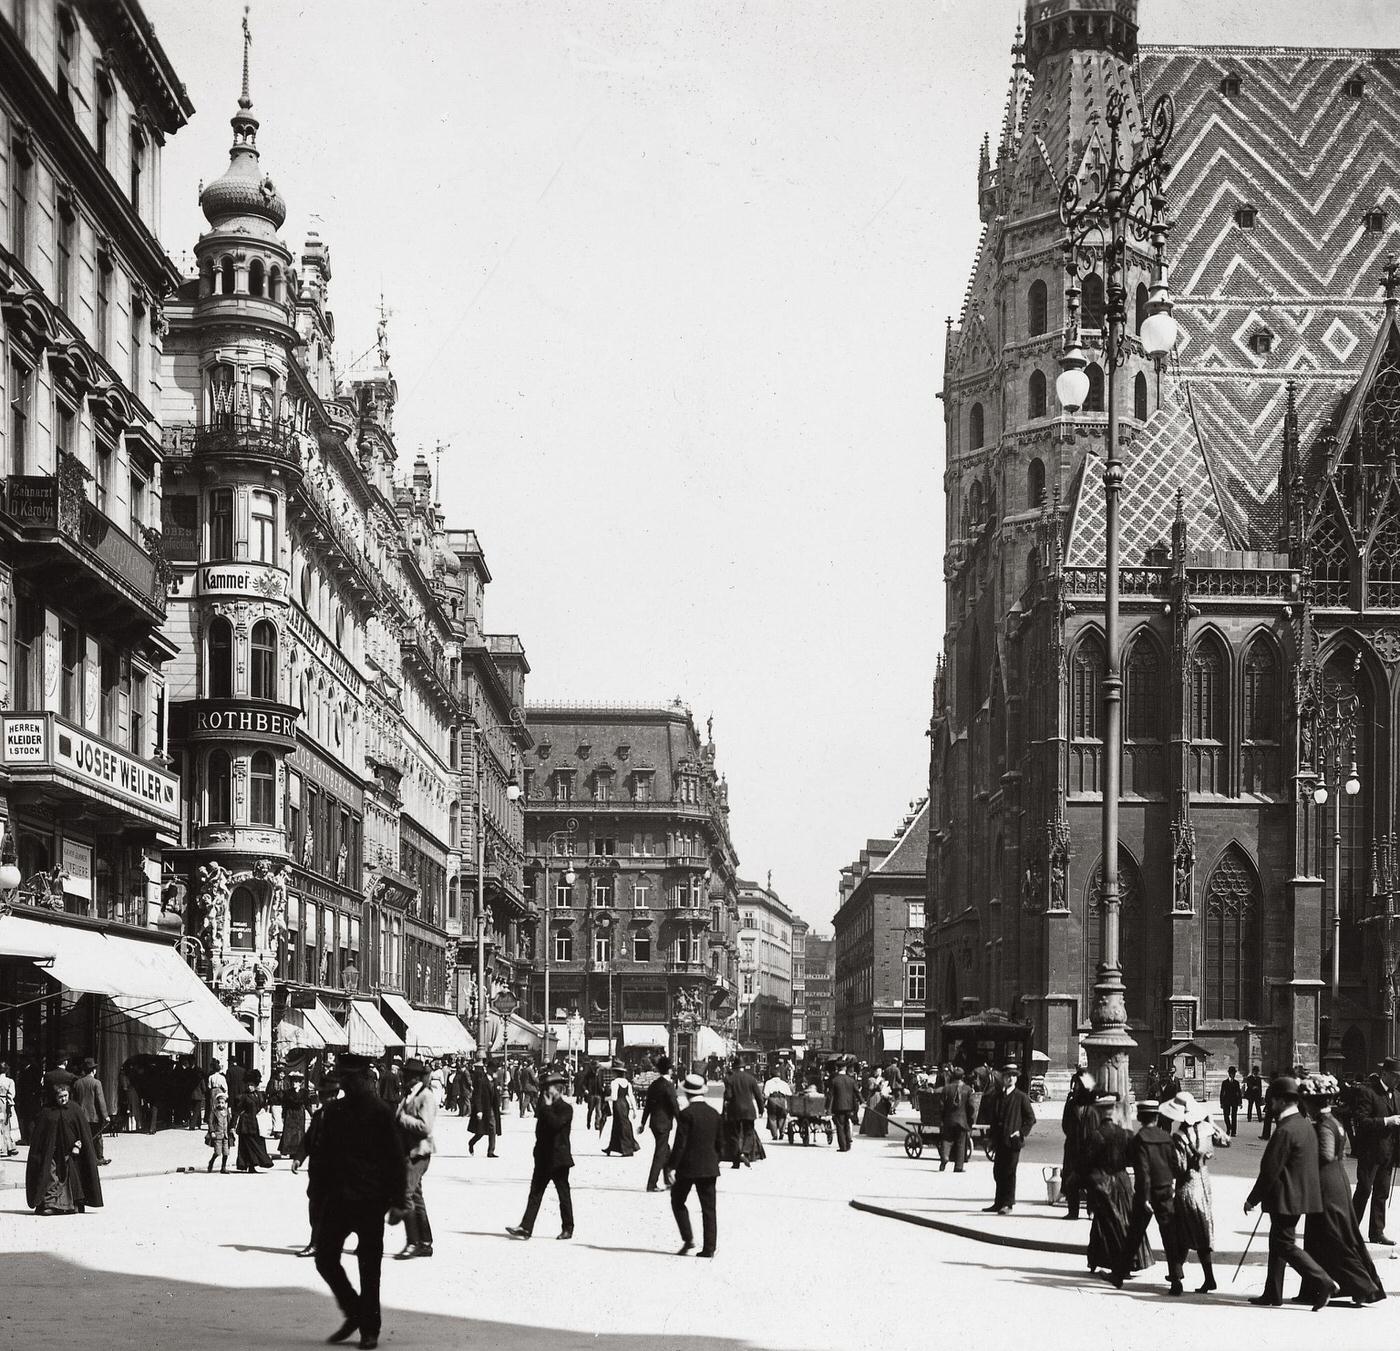 St. Stephan's square with Red tower Street (Rotenturmstrasse), Around 1900s